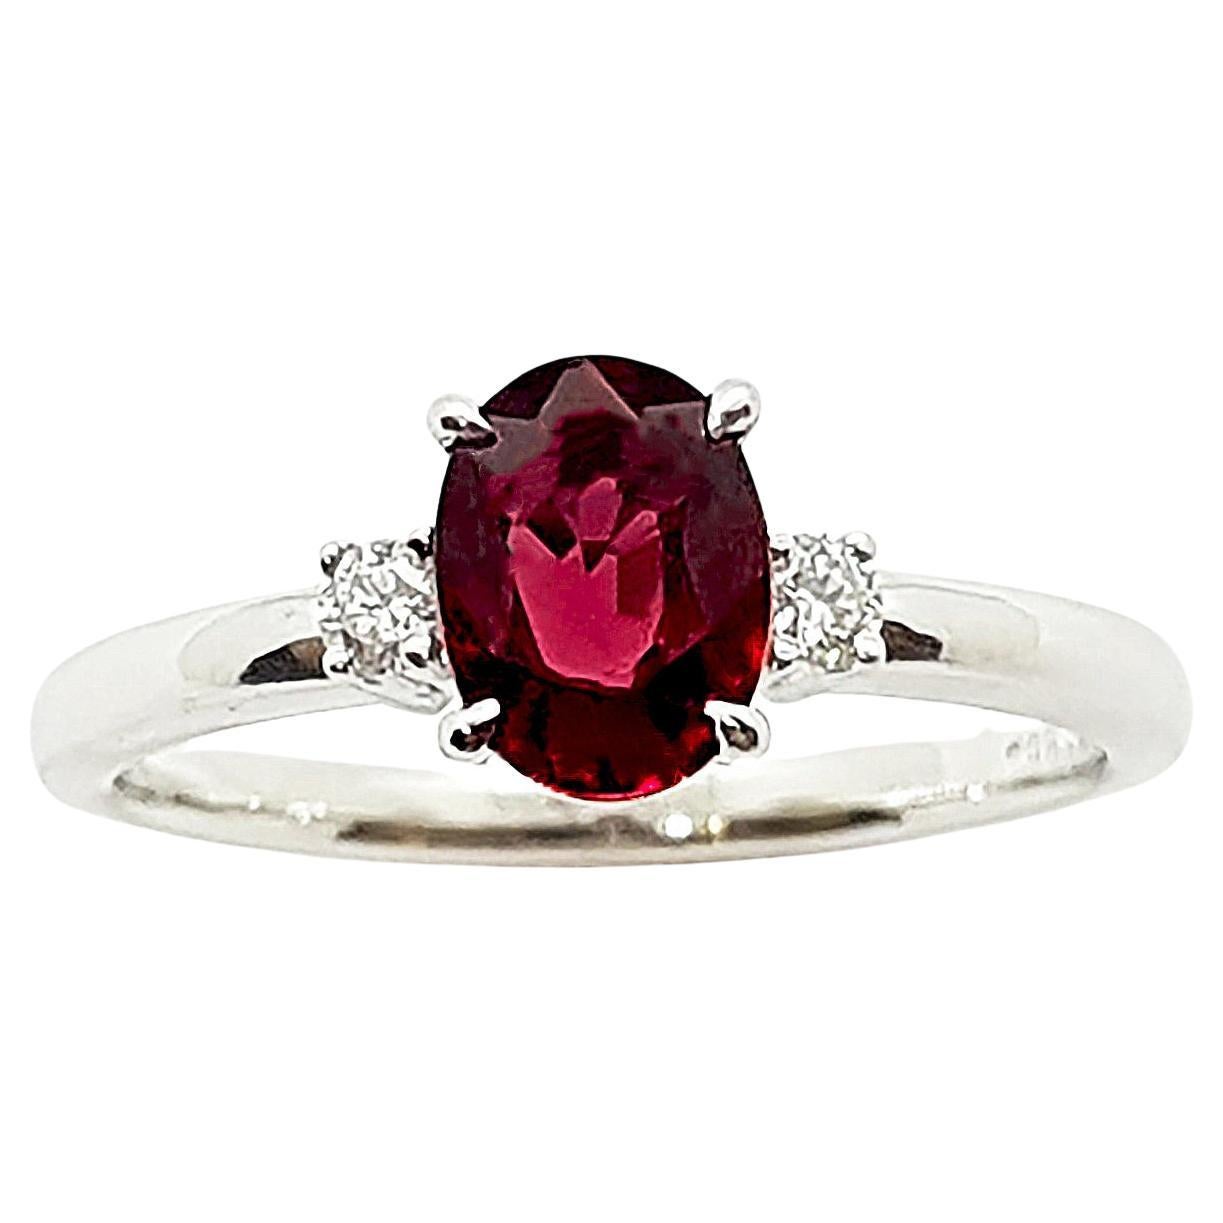 Certified Unheated Ruby with Diamond Ring Set in Platinum 950 Settings